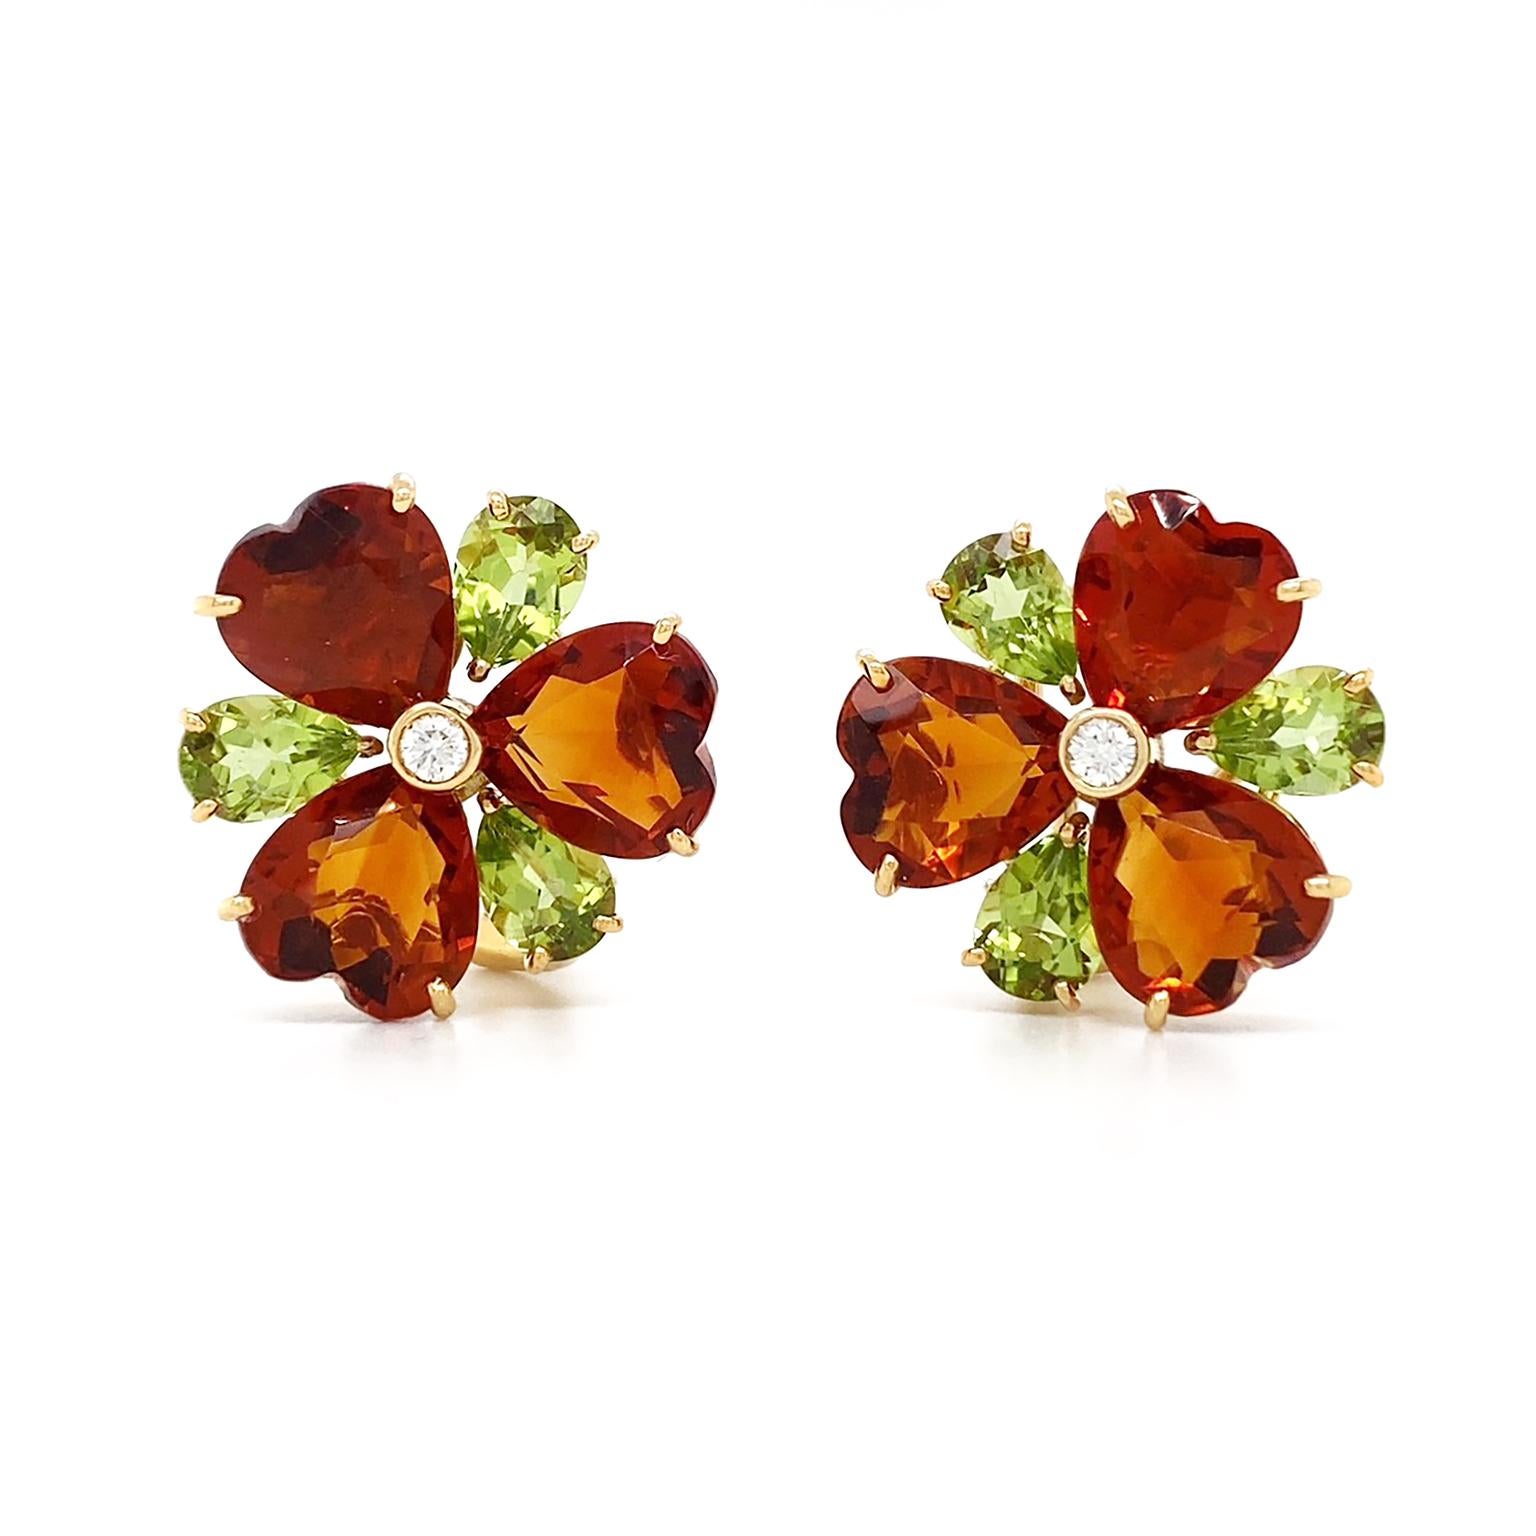 Earth toned jewels create a clover motif. 3 heart shaped citrines meet at their points, each radiating a range of deep orange shades. In between each citrine is a pear shape peridot, emitting bright and olive toned light from its facets. A single